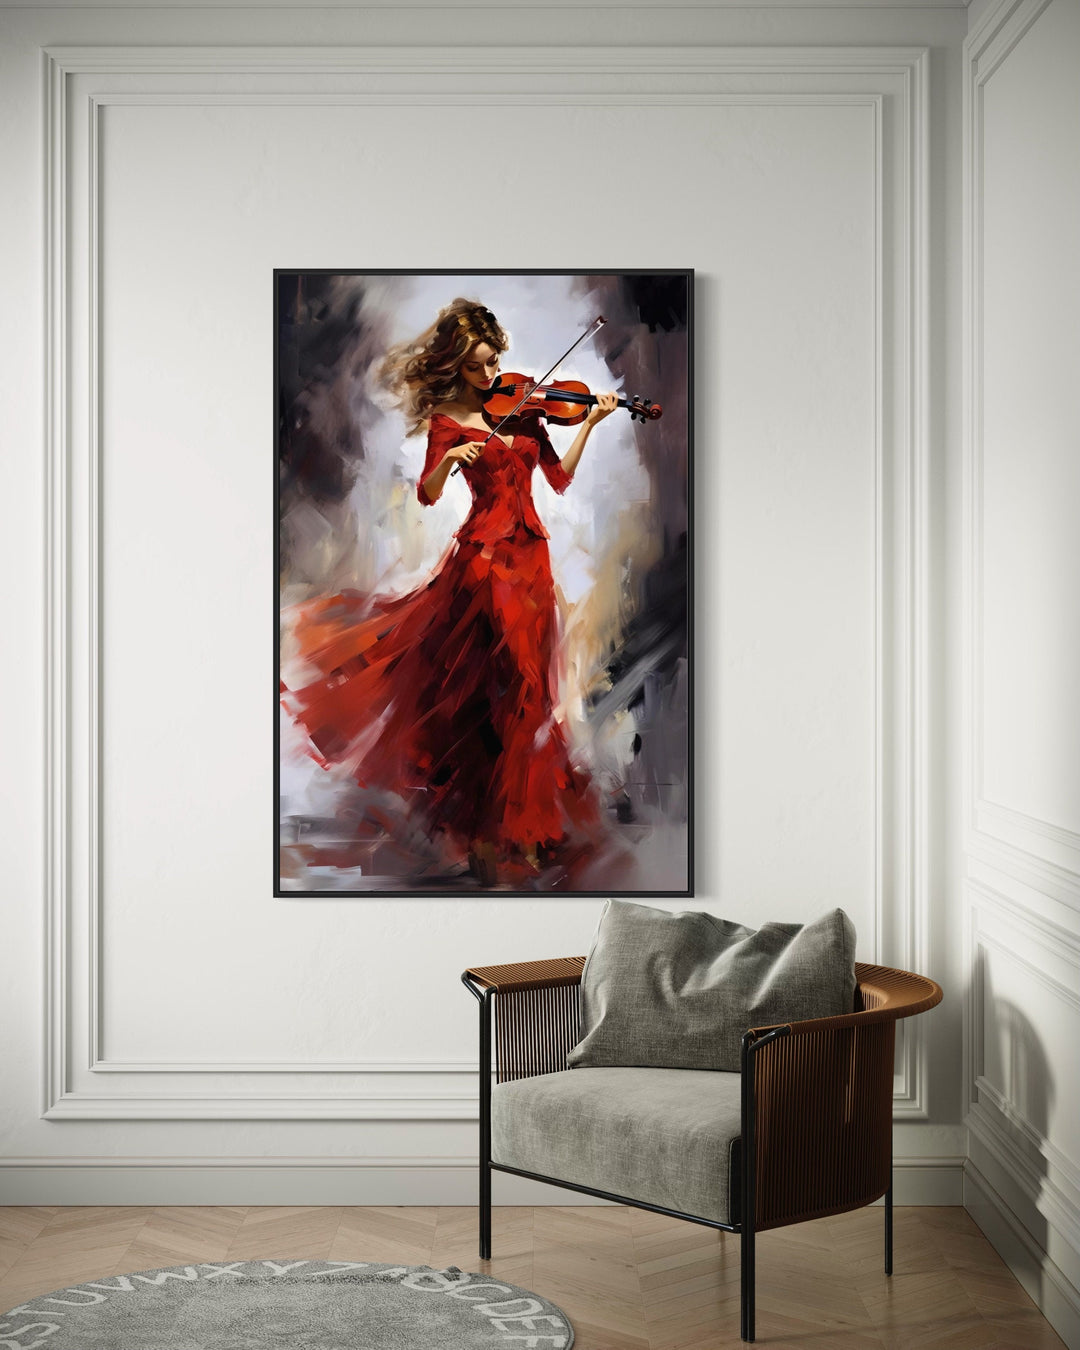 Violin Player In Red Dress Framed Canvas Wall Art on large wall